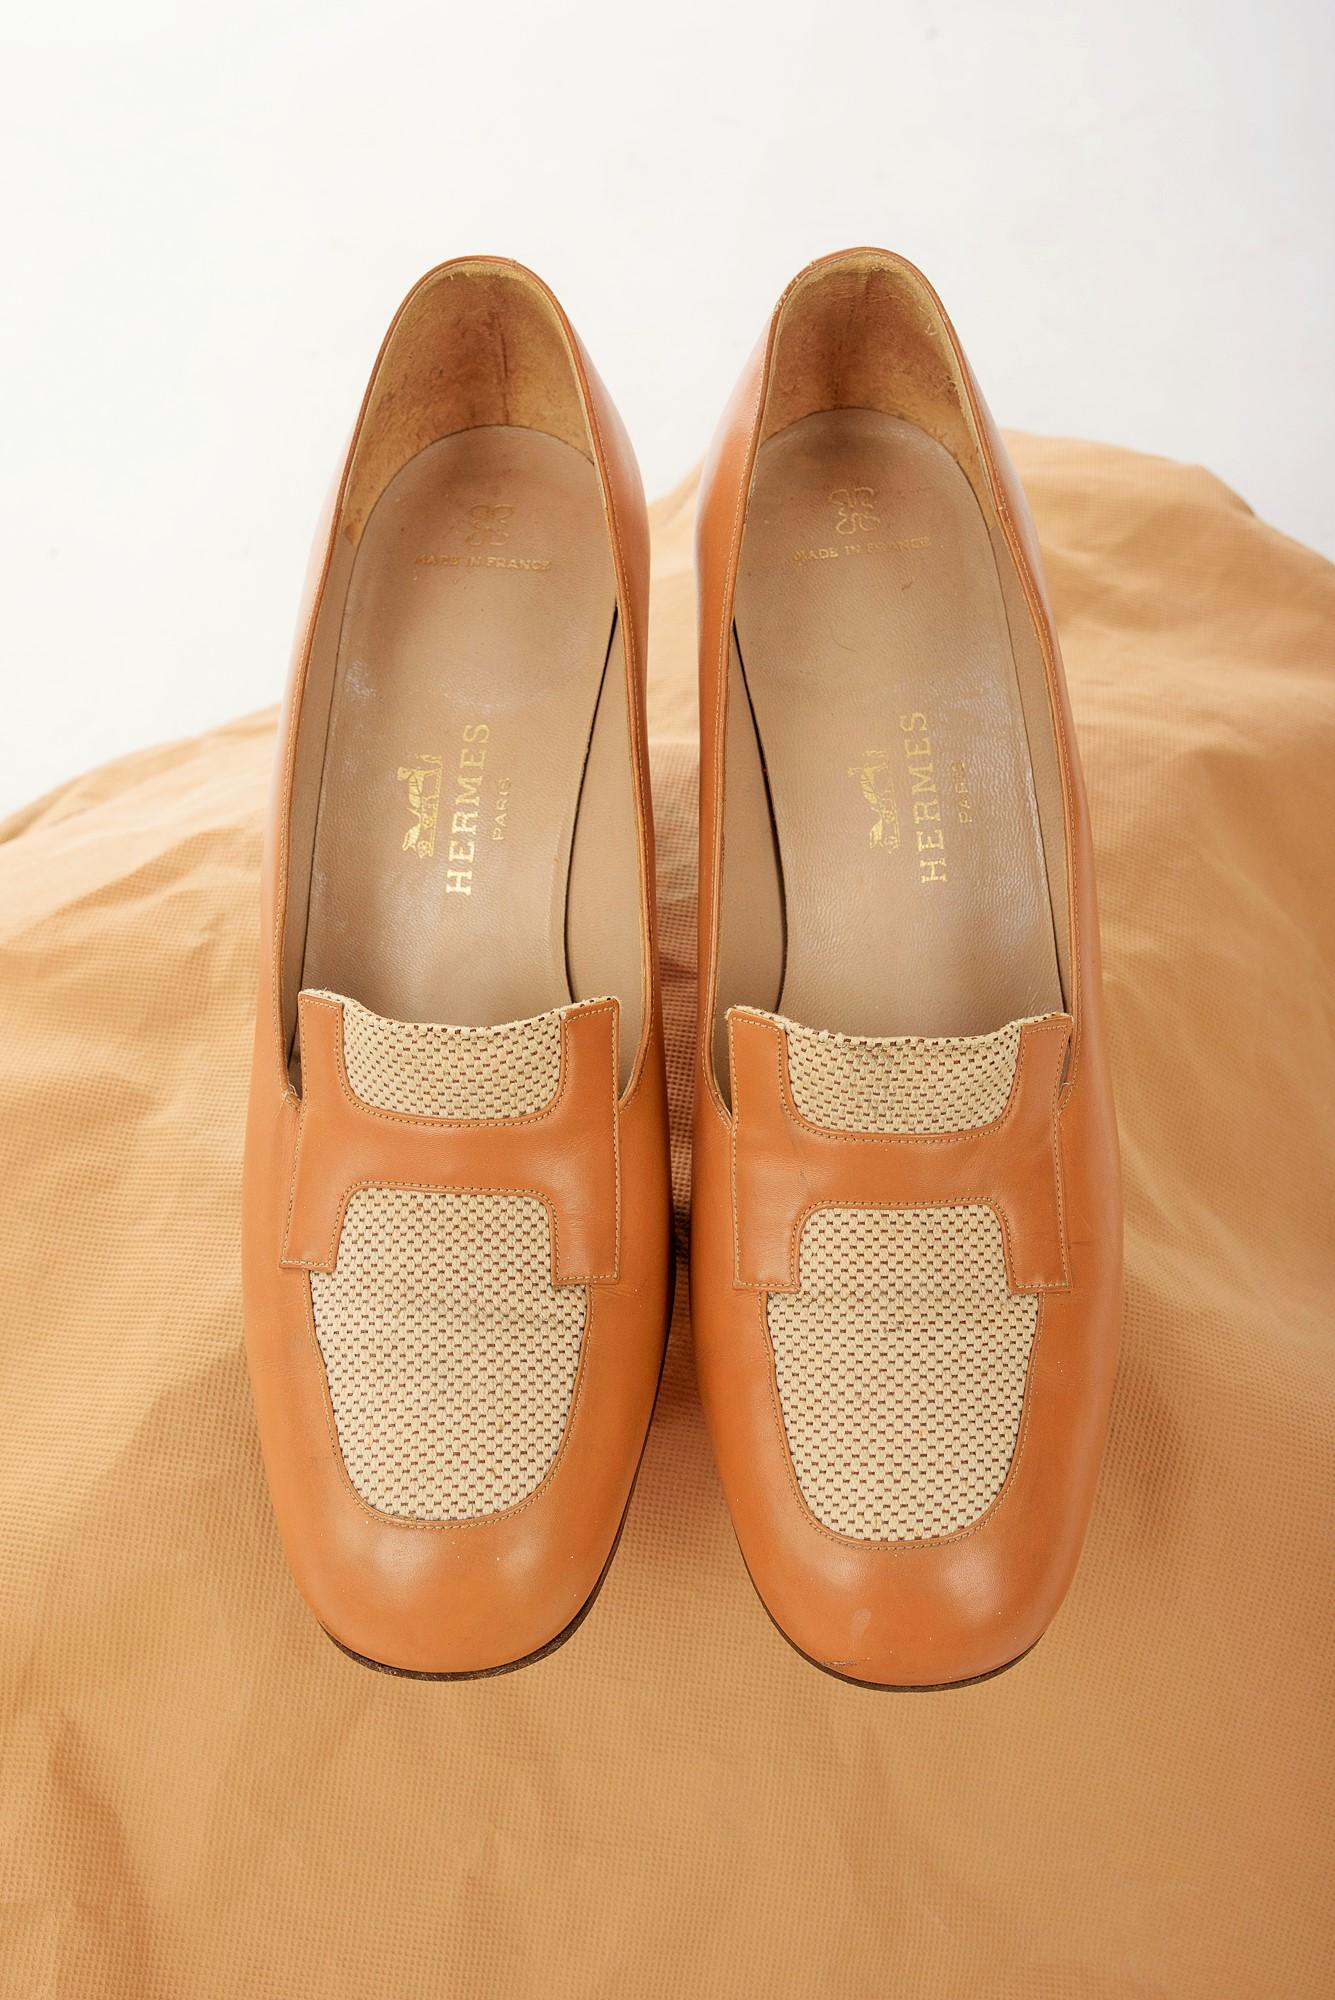 Circa 2000

Paris France

A beautiful pair of heels (7 cm) or pumps in camel leather and cotton canvas with the famous H of Hermes on the vamp. Numbered 712183 in 39 F Made in France. Small scratch on a shoe at the edge of the sole with the patina